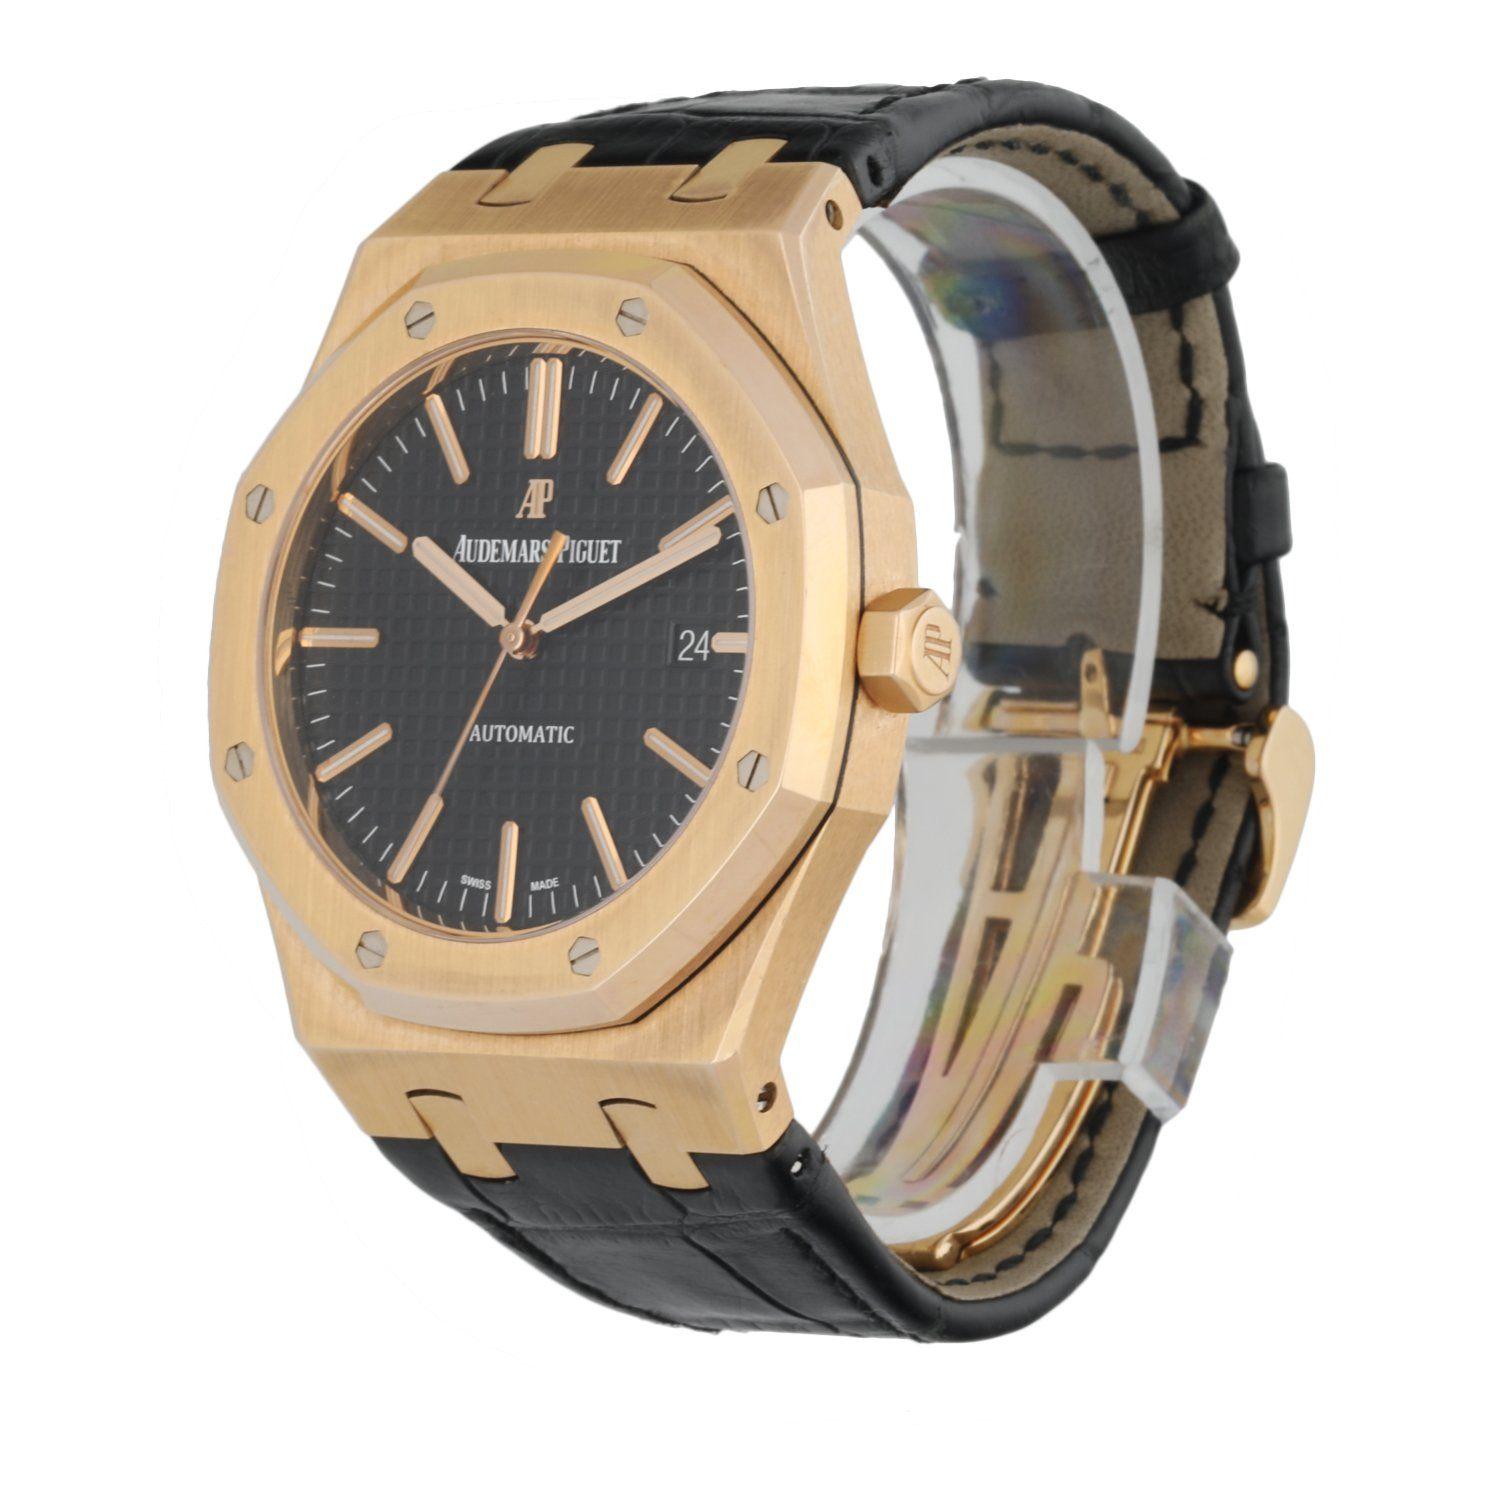 Audemars Piguet Royal Oak 15400OR.OO.D002CR.01 men's watch. 41mm 18k rose Gold case and 18K rose gold octagon shaped fixed bezel. Black tapisserie pattern dial with rose gold-tone luminous hands and luminous index hour markers. Date display at 3